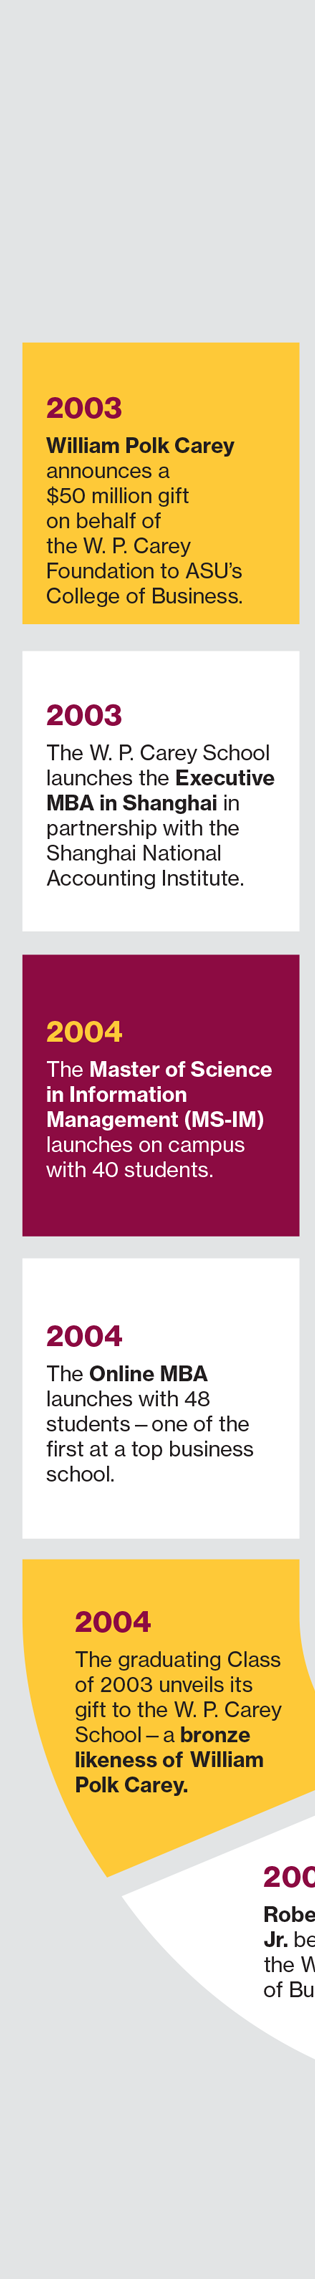 In 2003, William Polk Carey announced a $50 million gift from the W. P. Carey Foundation to ASUs College of Business. In the same year, the W. P. Carey School initiated the Executive MBA program in Shanghai in partnership with the Shanghai National Accounting Institute. In 2004, the Master of Science in Information Management (MS-IM) program started on campus with 40 students, and the Online MBA program launched with 48 students, making it one of the first at a top business school. Additionally, in 2004, the graduating Class of 2003 presented a bronze likeness of Wm. Polk Carey as a gift to the W. P. Carey School.